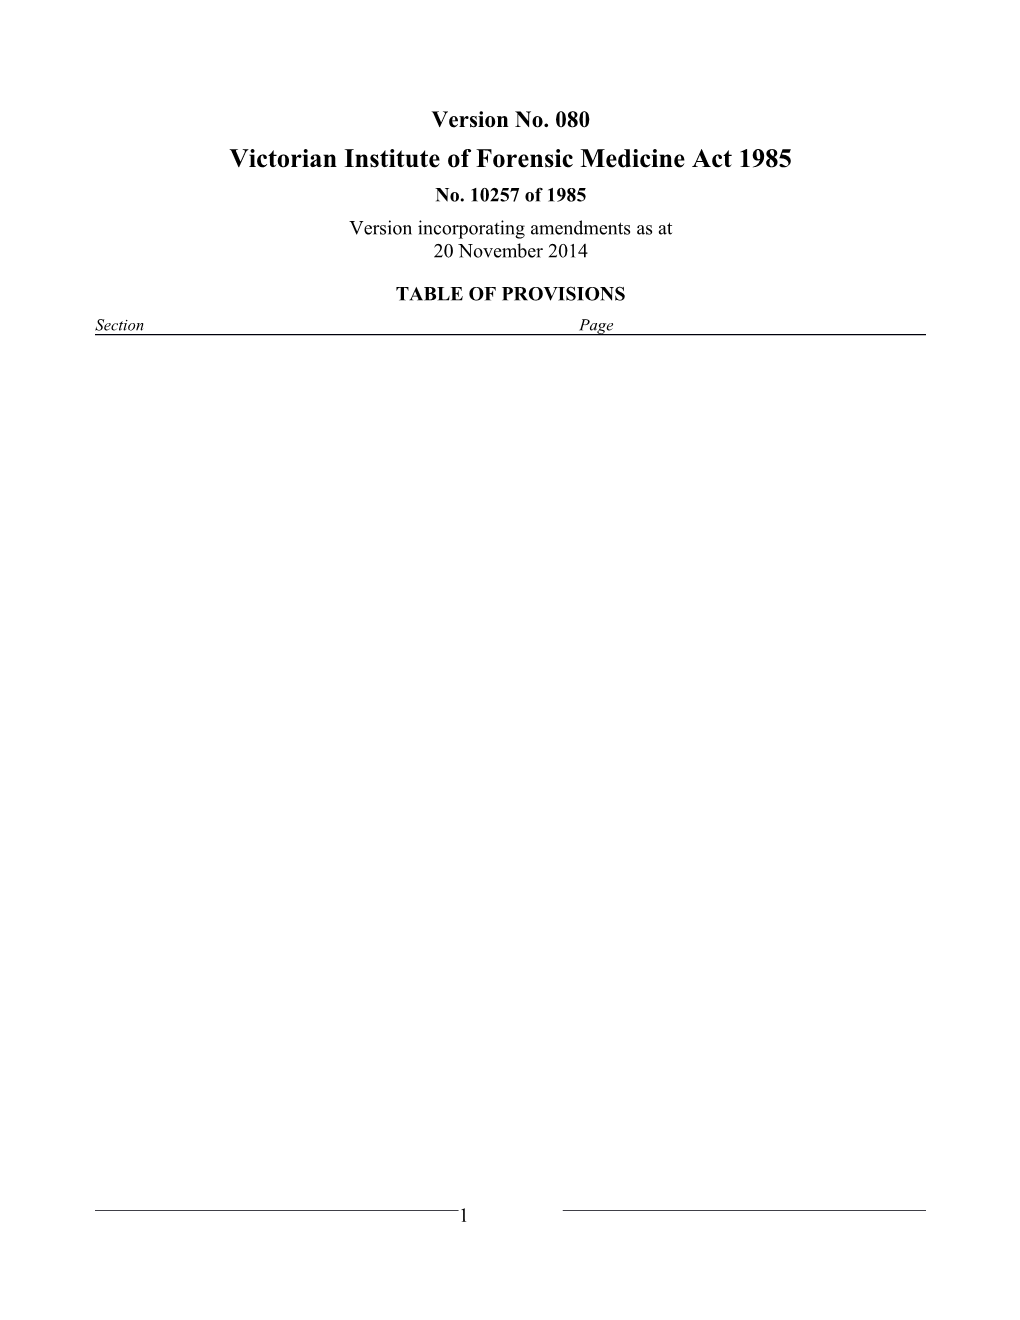 Victorian Institute of Forensic Medicine Act 1985